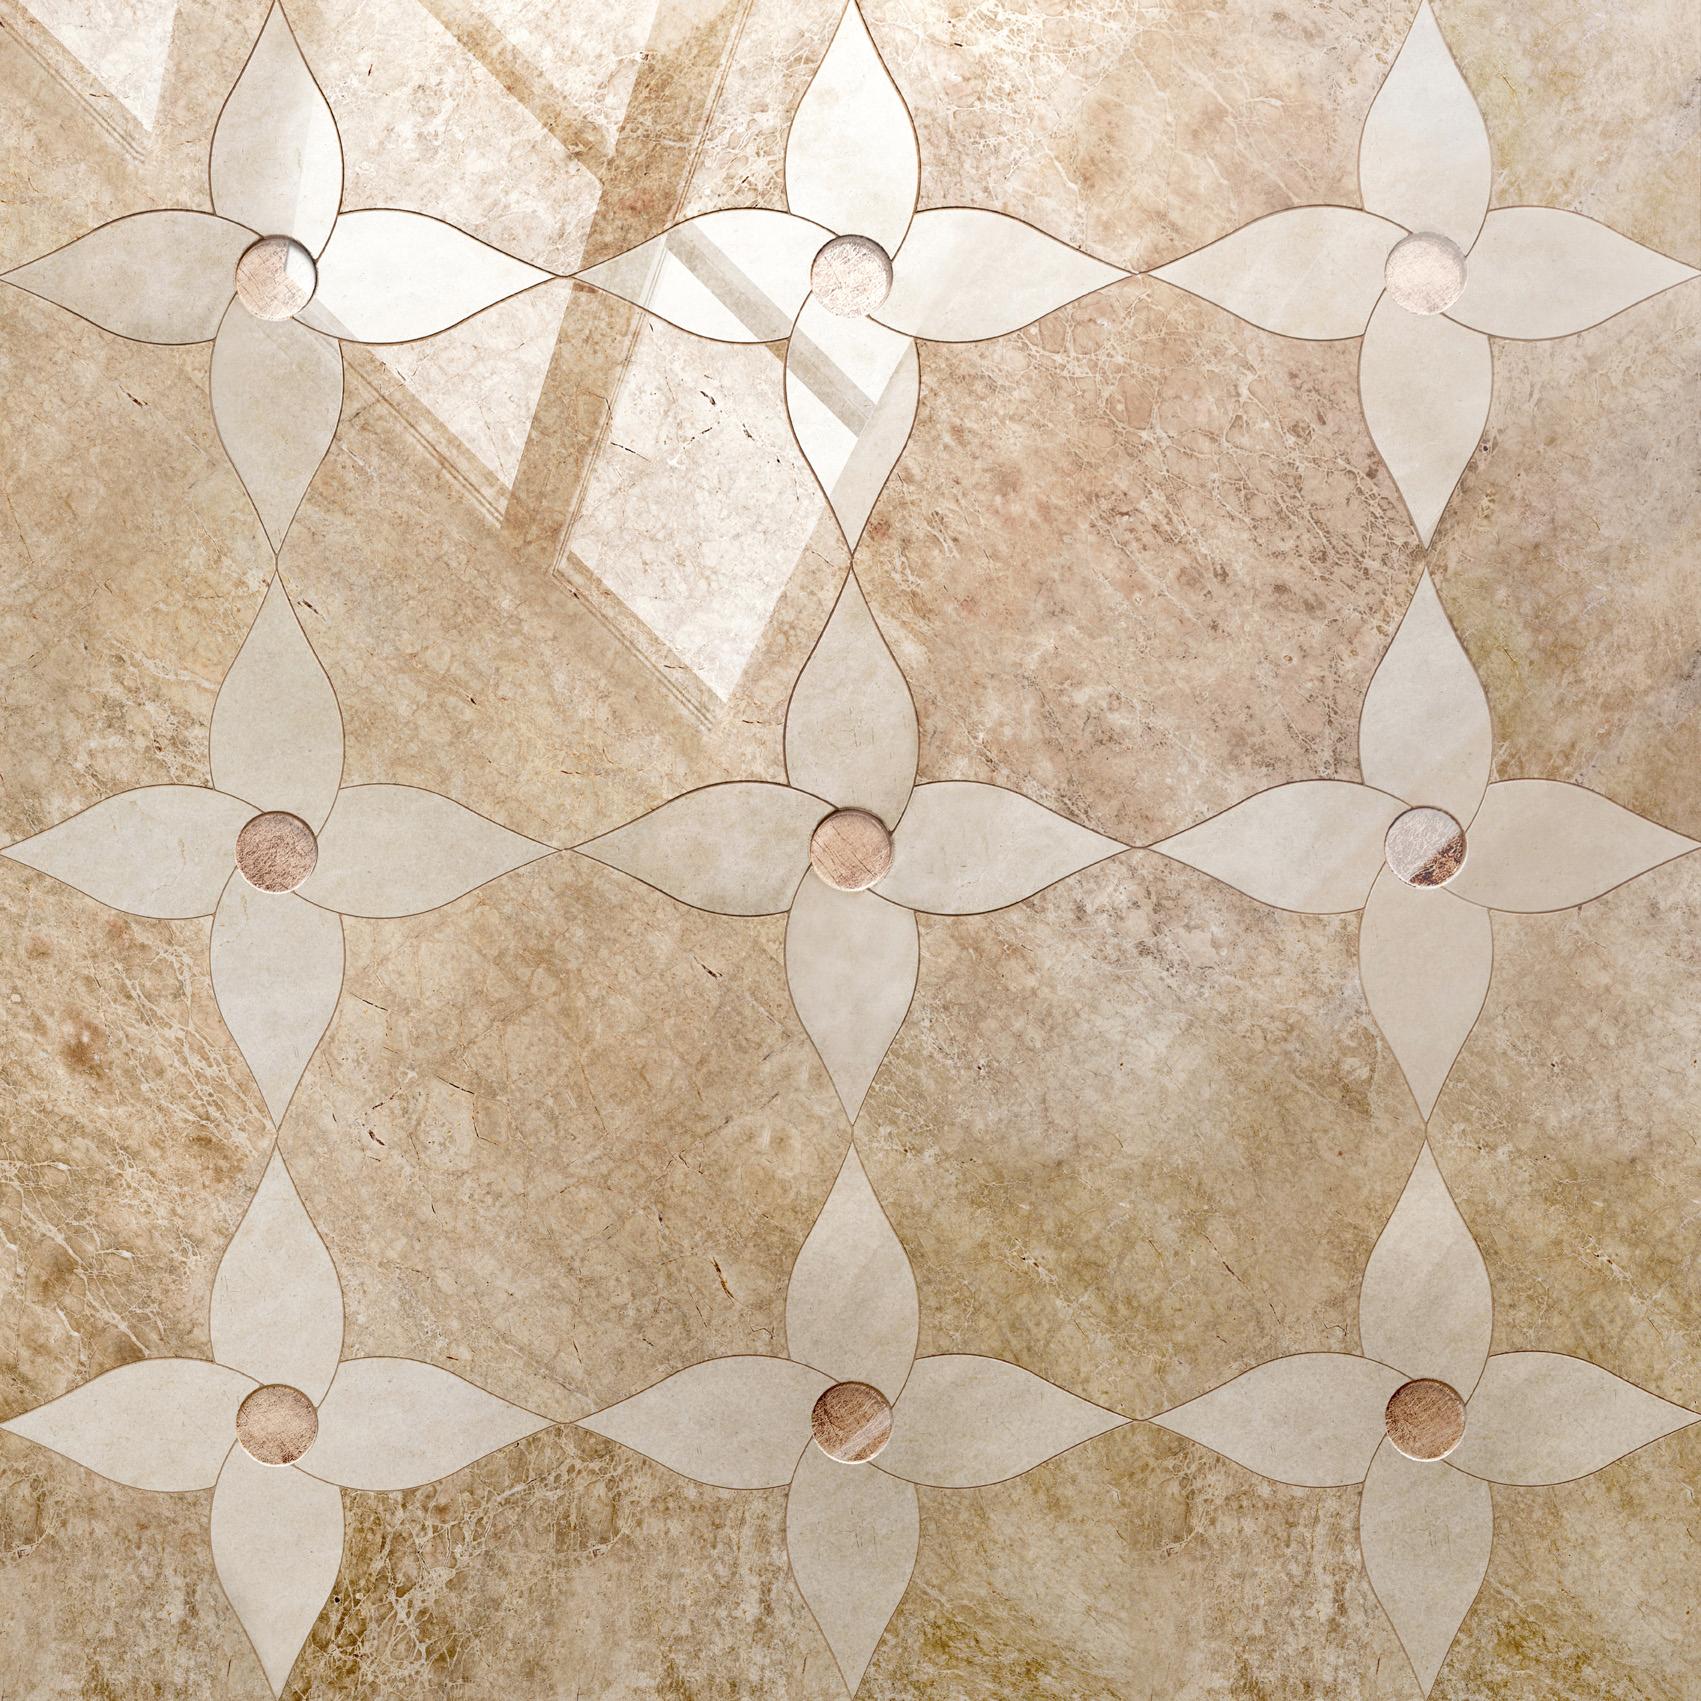 Modern Floor Waterjet Cut Marble Tiles Available in Different Marbles Combination For Sale